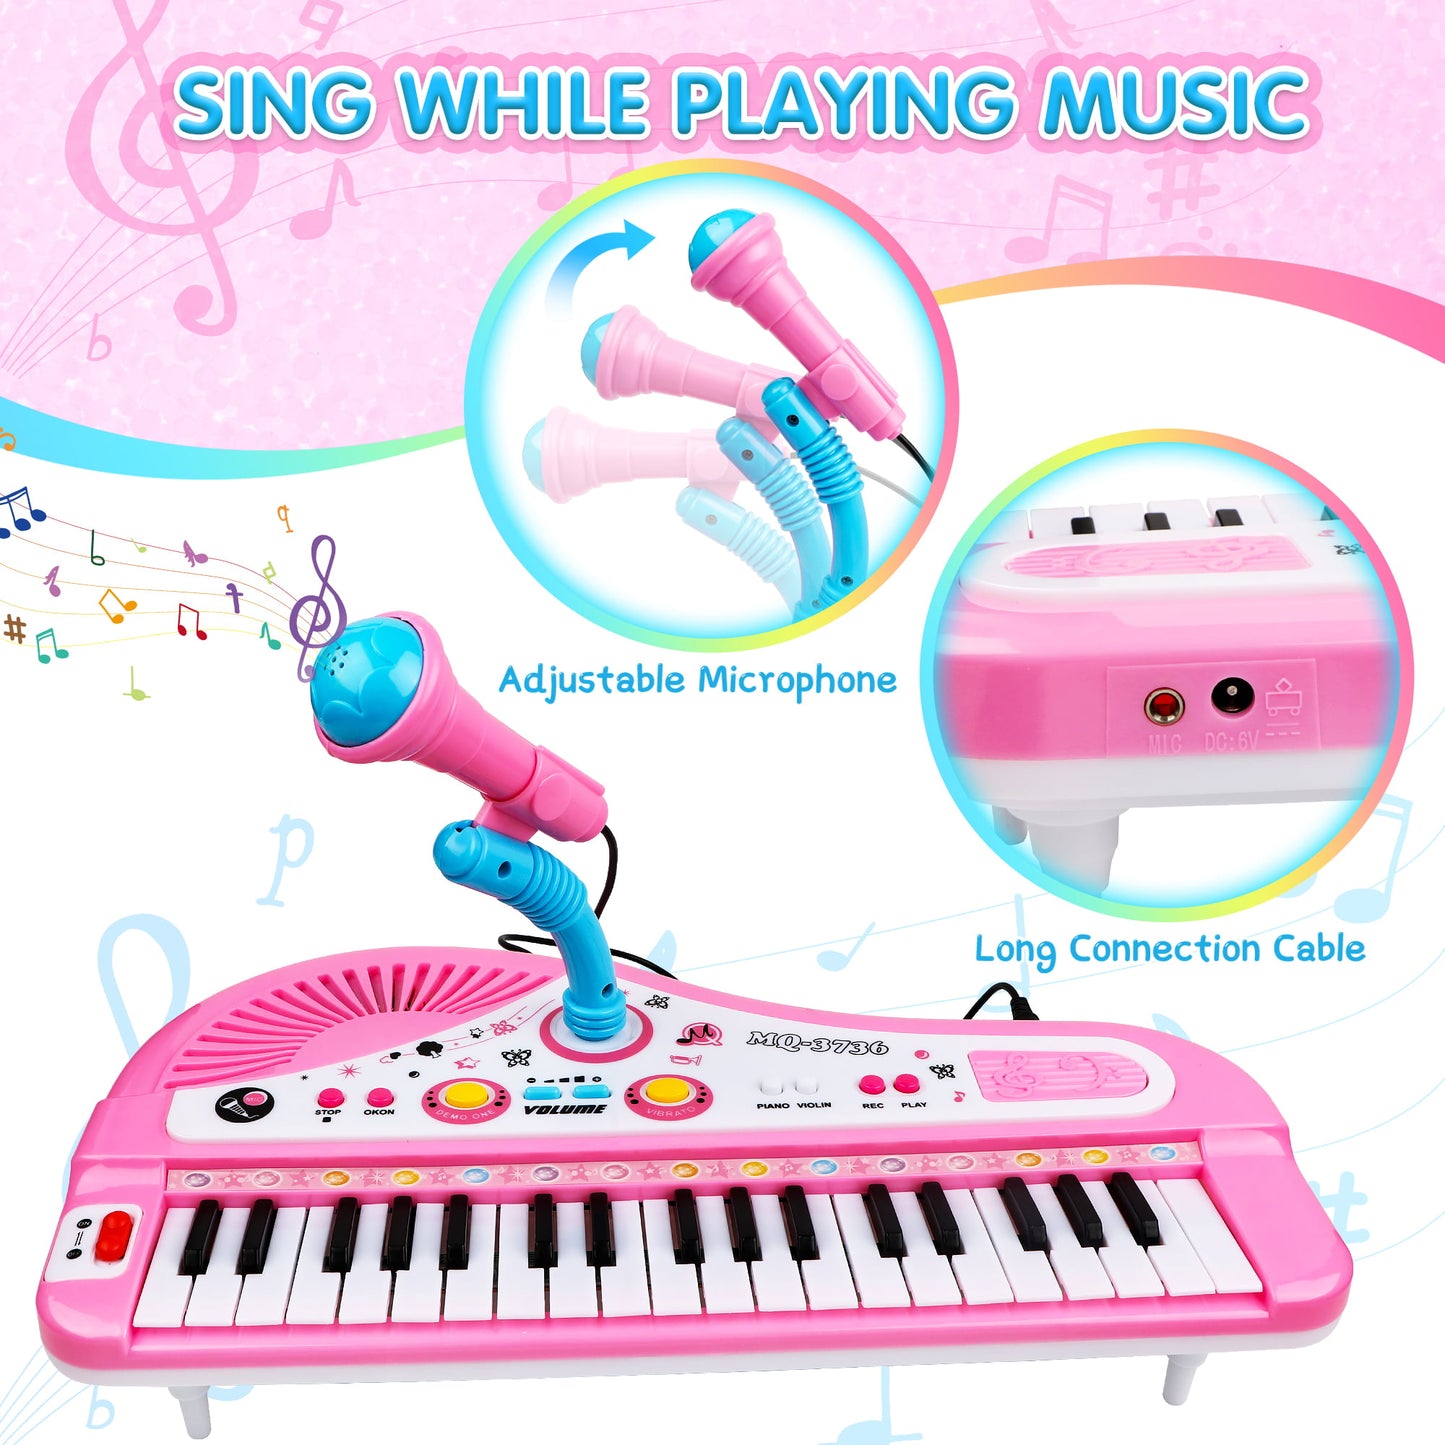 Pink Baby Piano Keyboard Toys for Kids, Musical Instrument with Microphone for Toddlers, Preschooler Music Learning Popular Piano Toys, Birthday Christmas Gift for Girls Boys Aged 3 4 5 6+